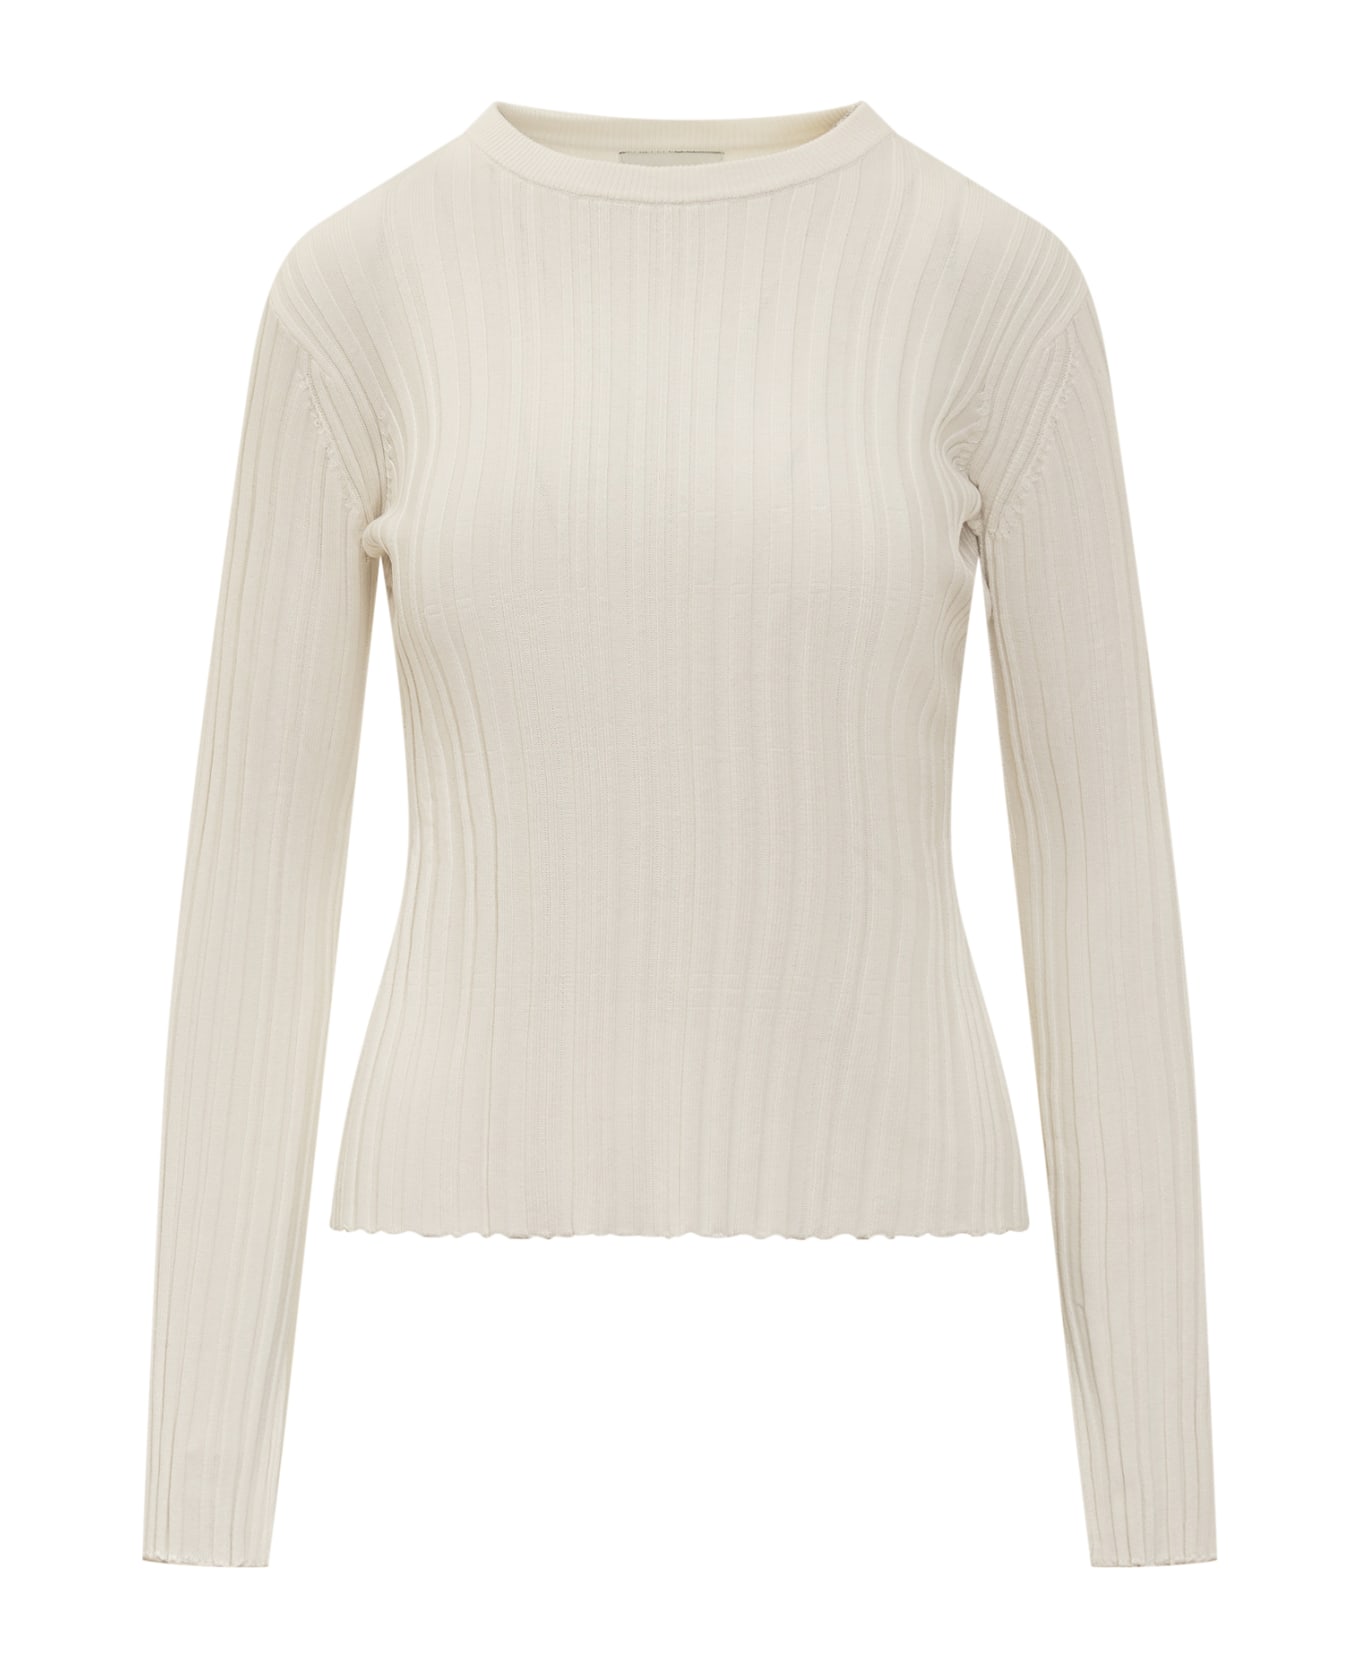 Loulou Studio Sweater - RICE IVORY